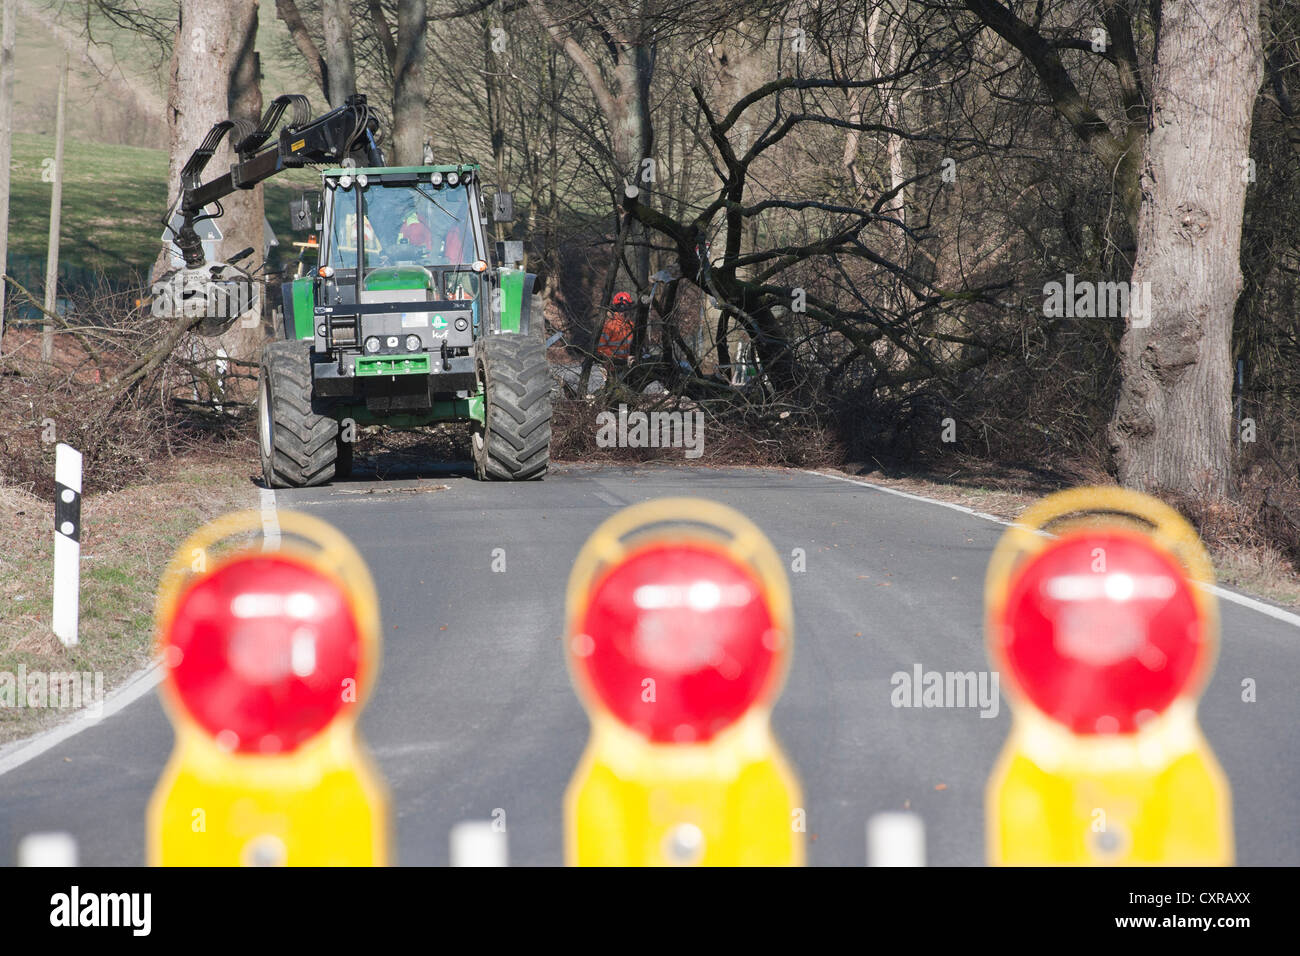 Road closure due to tree felling on the L284 road, Wipperfuerth, Bergisches Land region, North Rhine-Westphalia, Germany, Europe Stock Photo